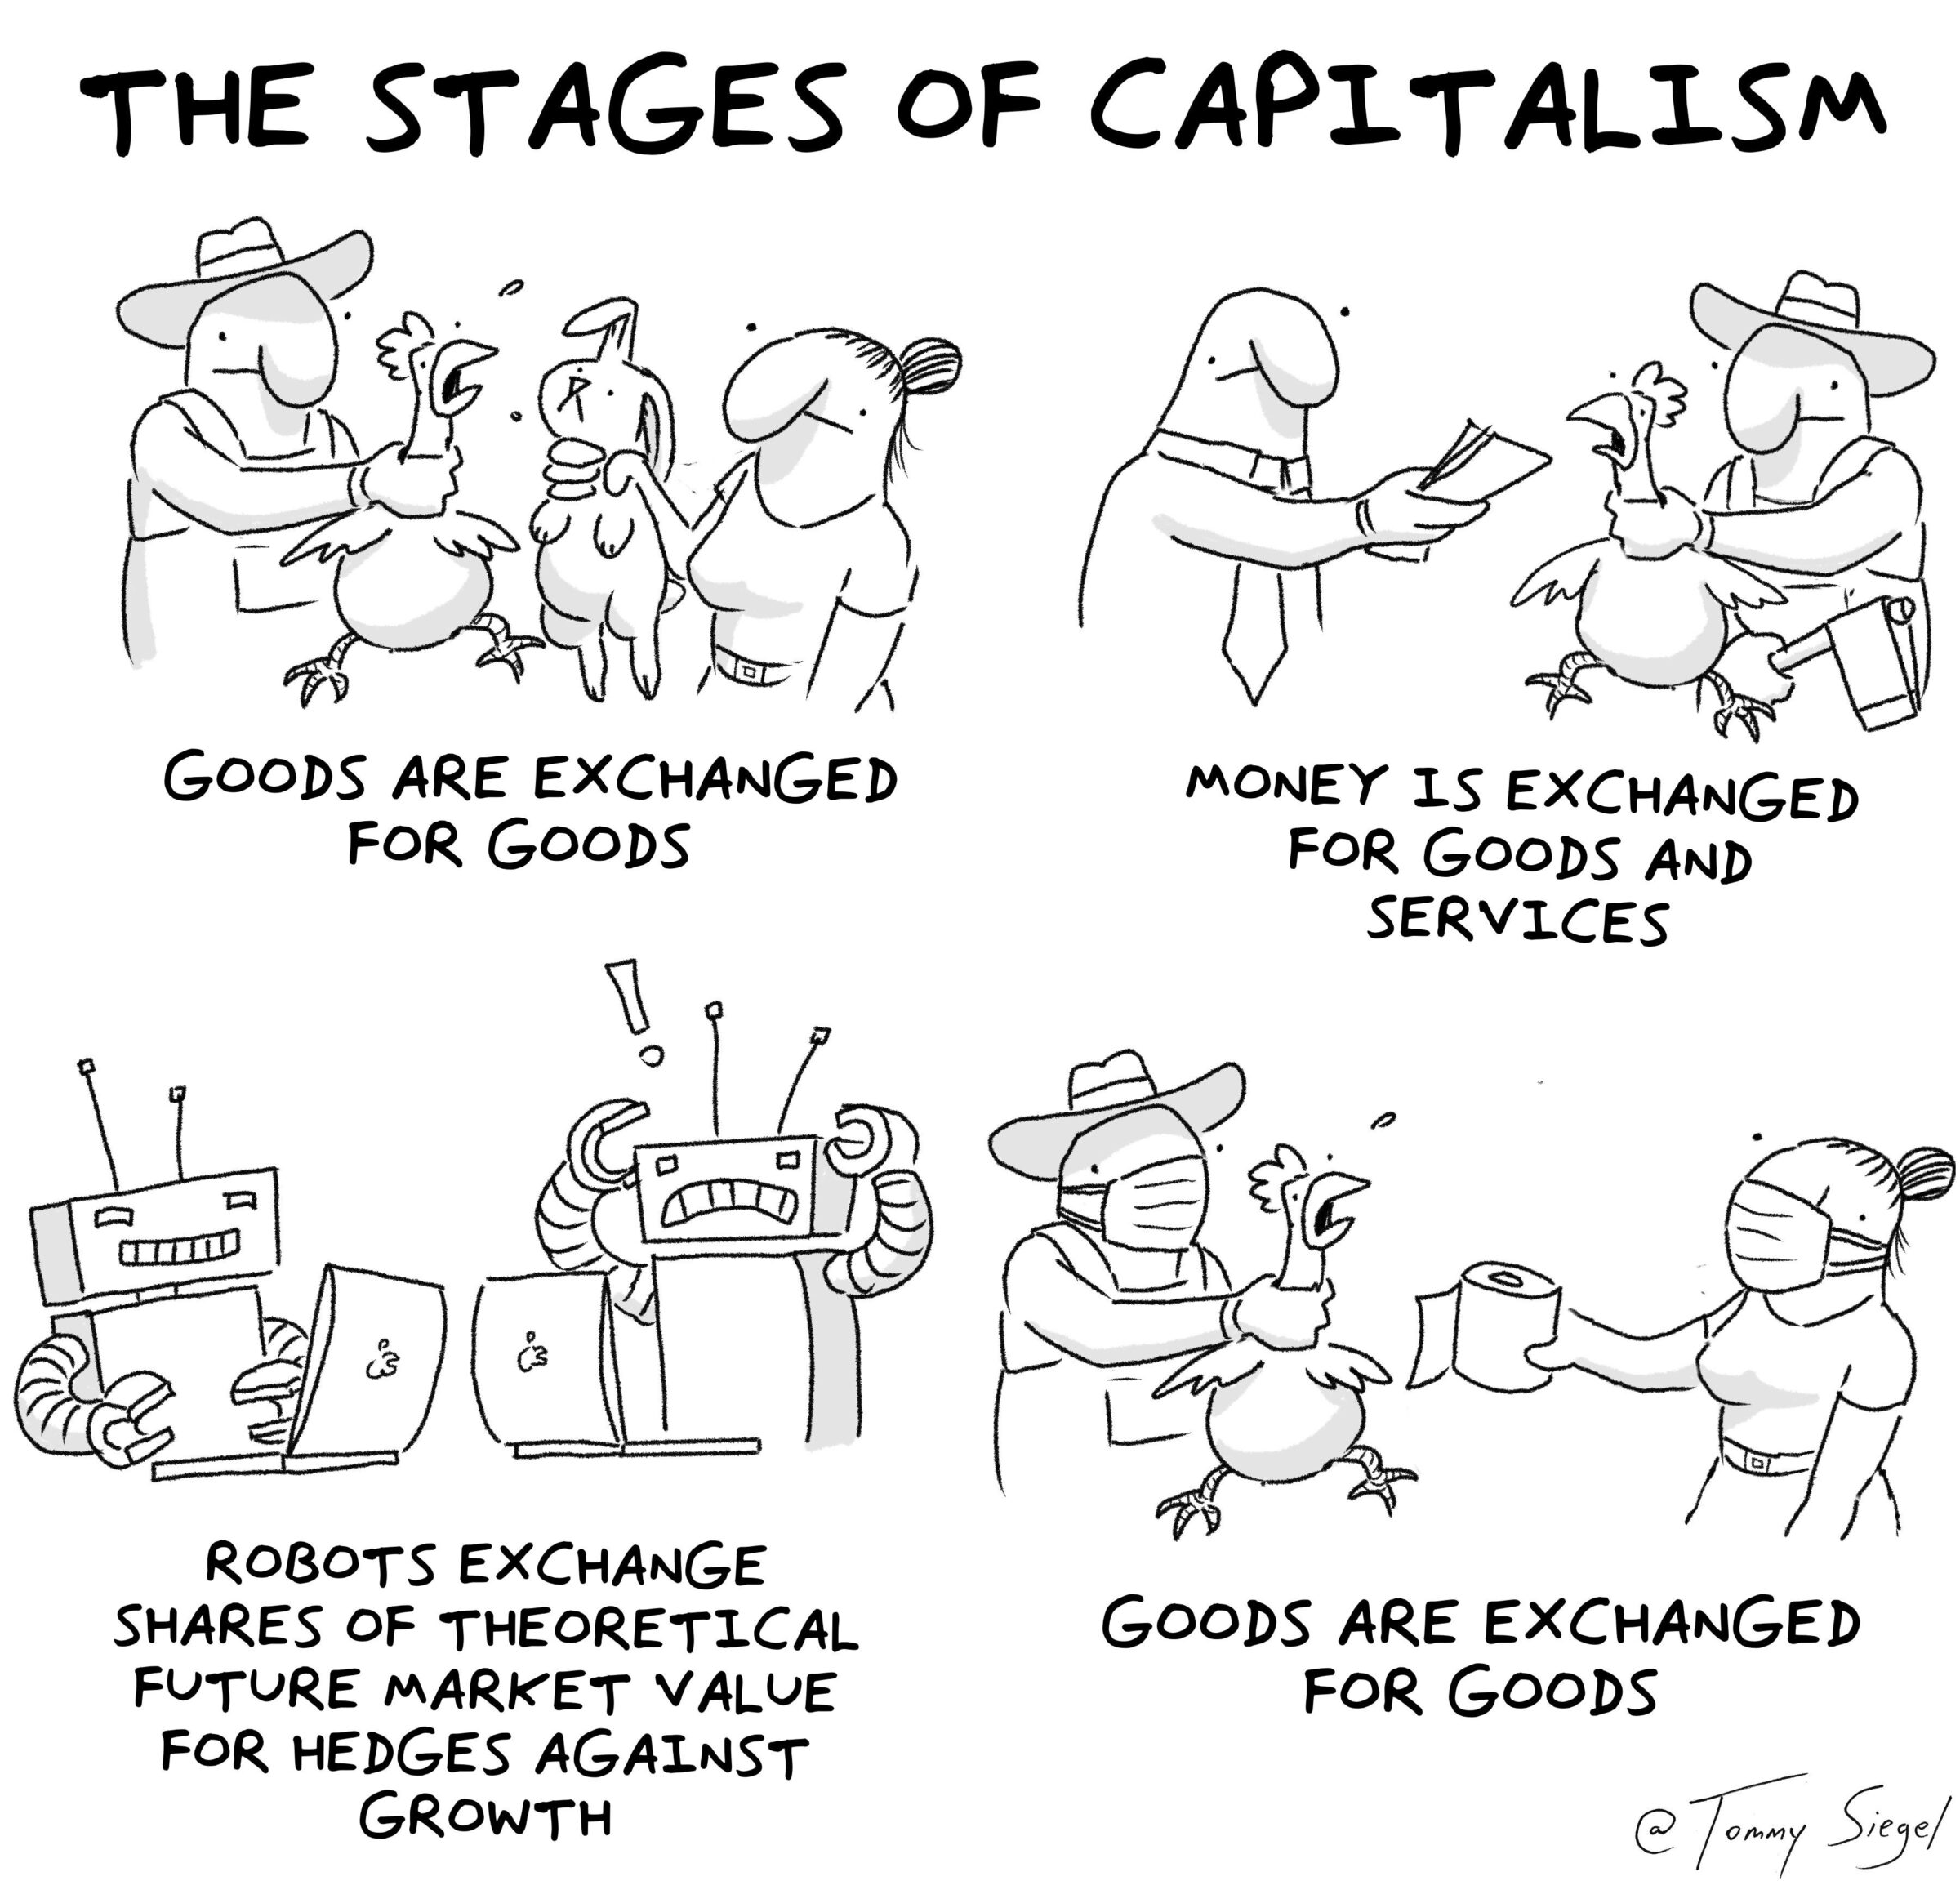 The stages of capitalism (from tommysiegel), Walmart, Econ, Capitalism Comics The stages of capitalism (from tommysiegel), Walmart, Econ, Capitalism text: THE STAGES OF CAPITALISM GOODS ARE EXCHANGED FOR GOODS ROBOTS EXCHANGE SHARES OF THEORETICAL FUTURE MARKET VALUE FOR HEDGES AGAINST GROWTH MONEY EXCHANGED FOR GOODS AND SERVICES GooDS ARE EXCHANGED FOR GOODS 